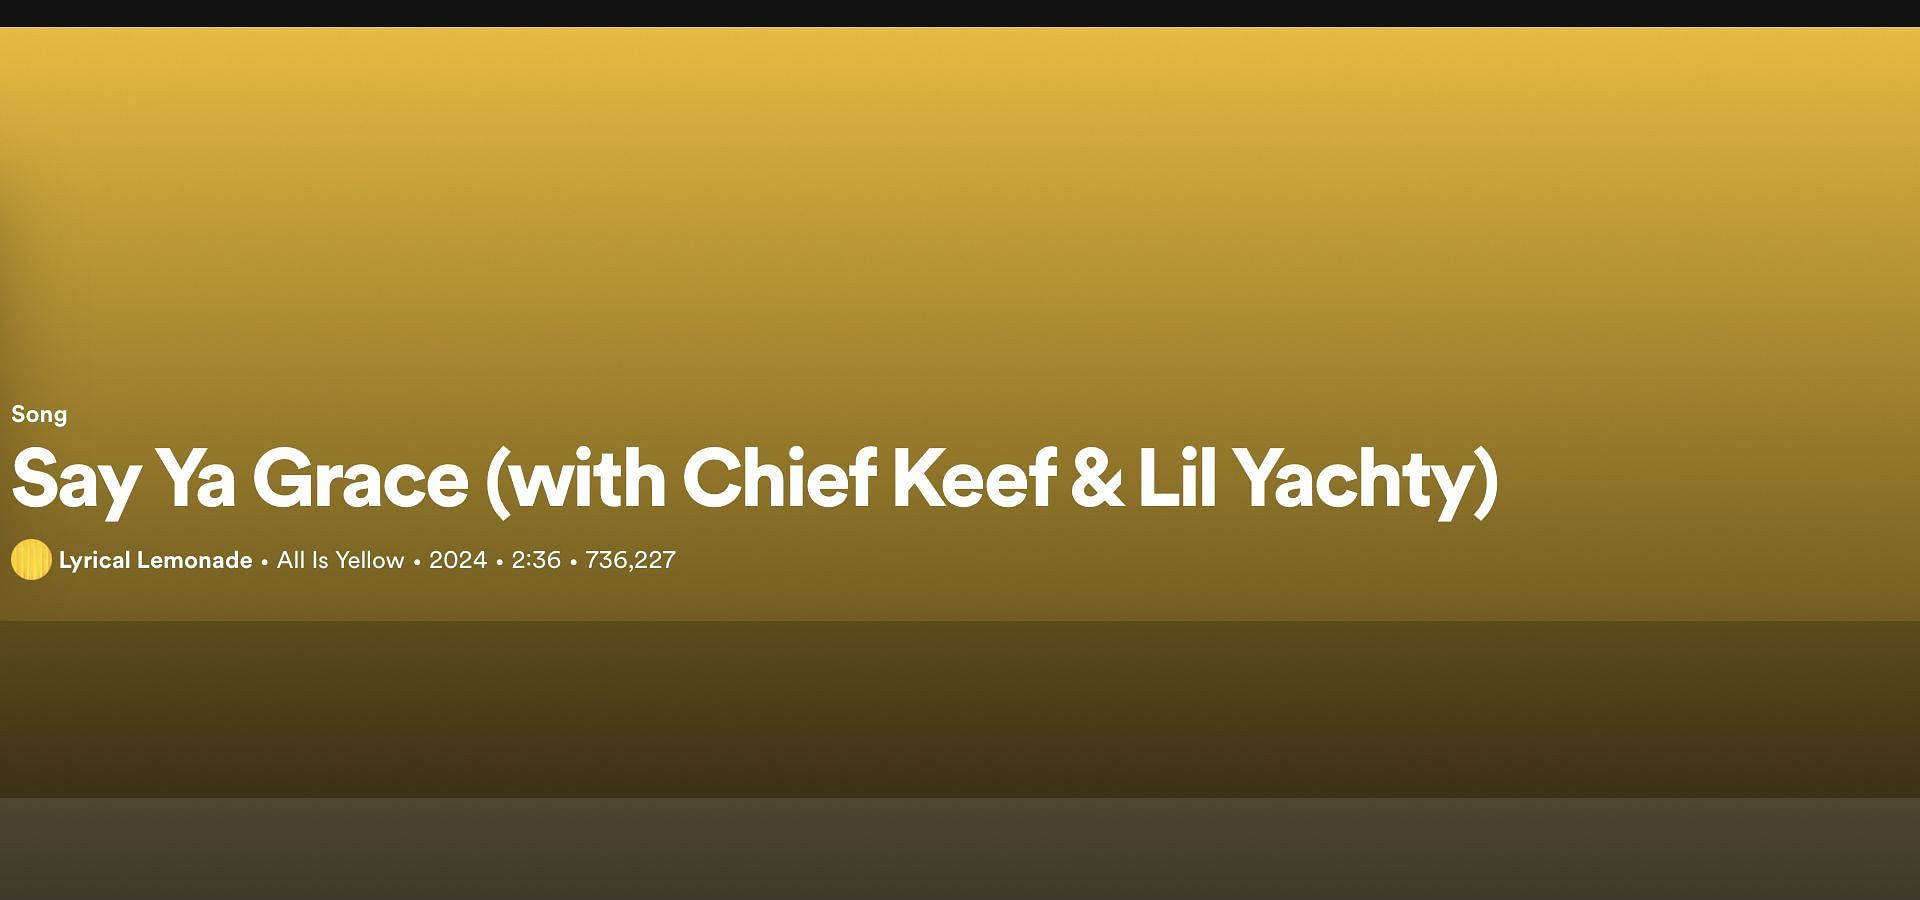 Track 3 from Lyrical Lemonade&#039;s All Is Yellow (Image via Spotify)